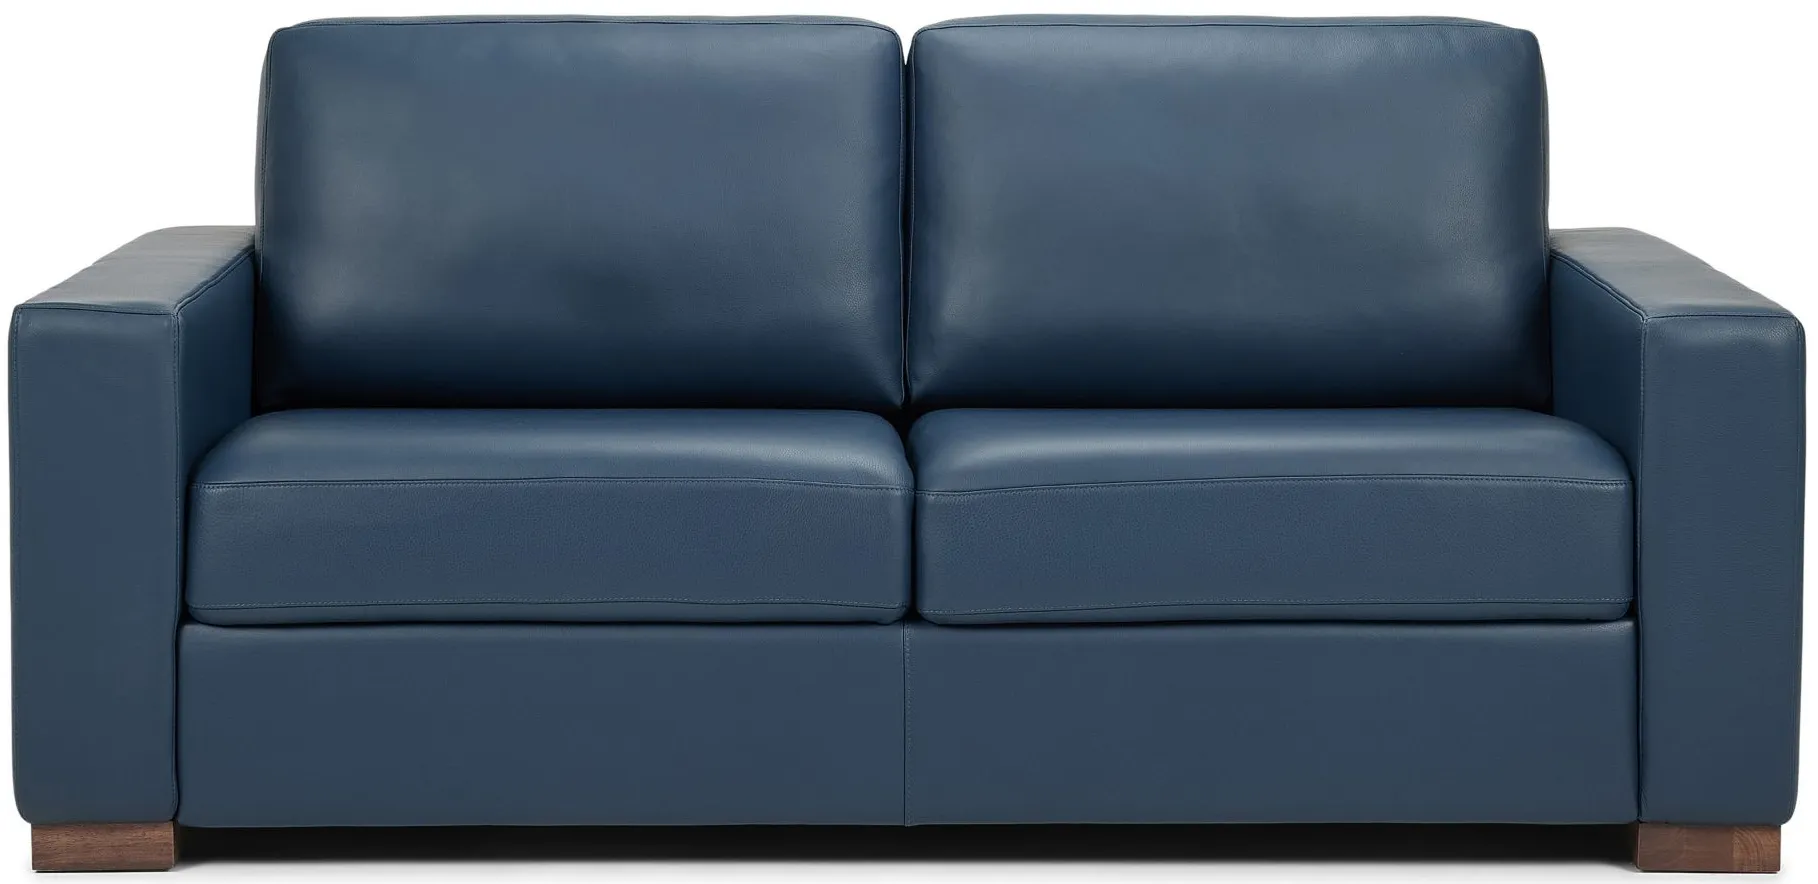 Revere King Sleeper in Bison Deep Blue by American Leather